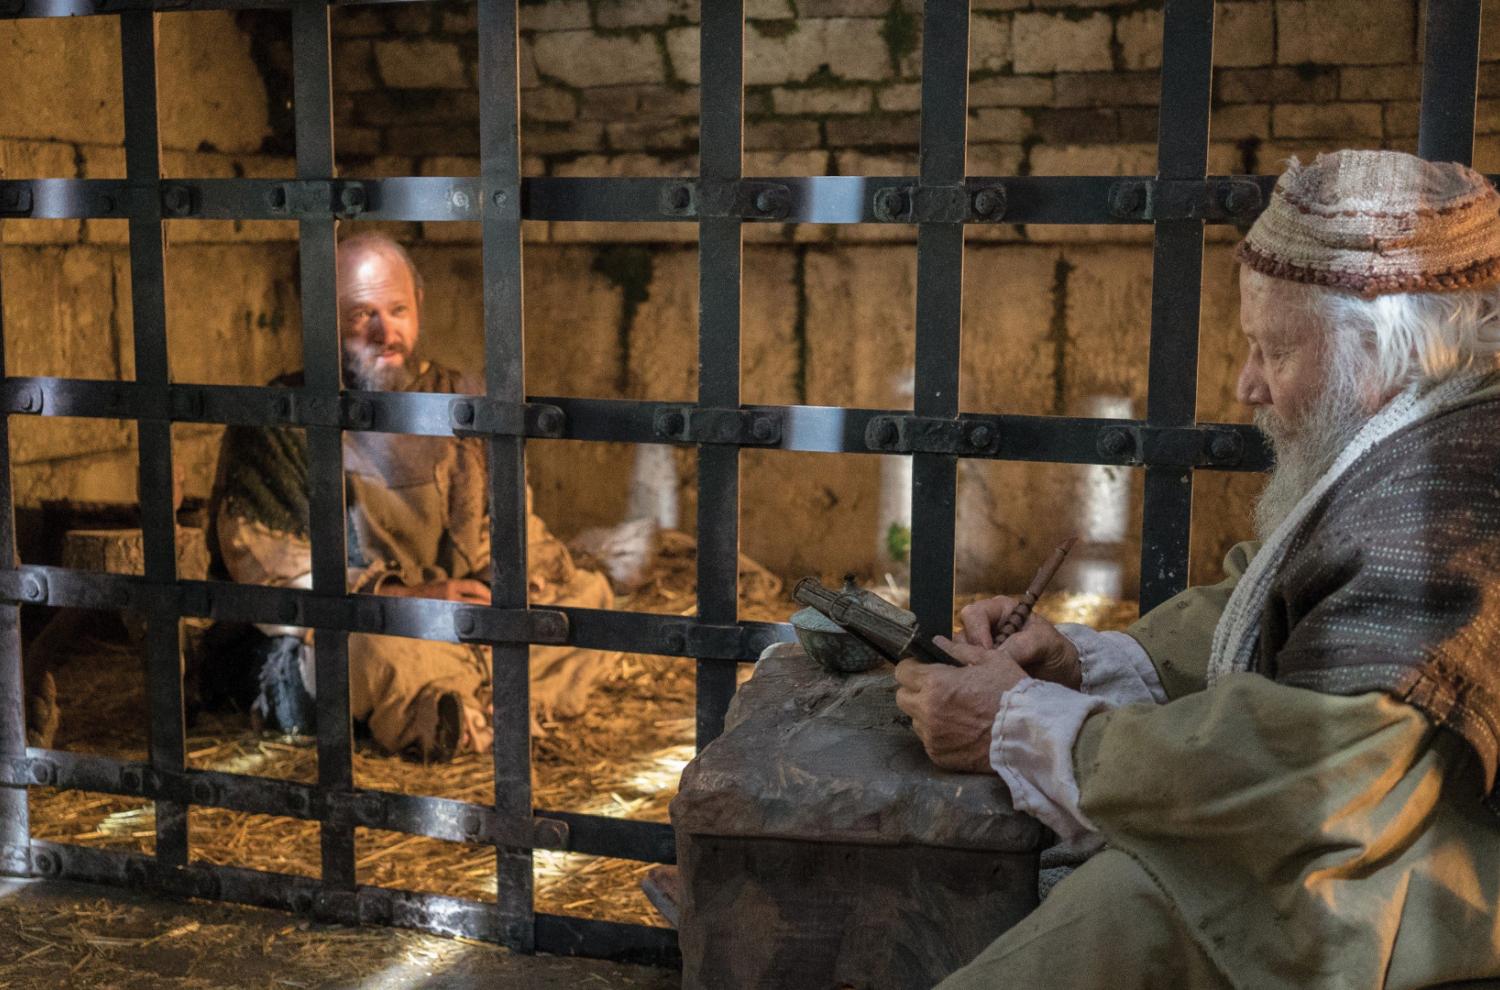 Paul dictates a letter from a jail cell. Image from Bible Videos of The Church of Jesus Christ of Latter-day Saints.